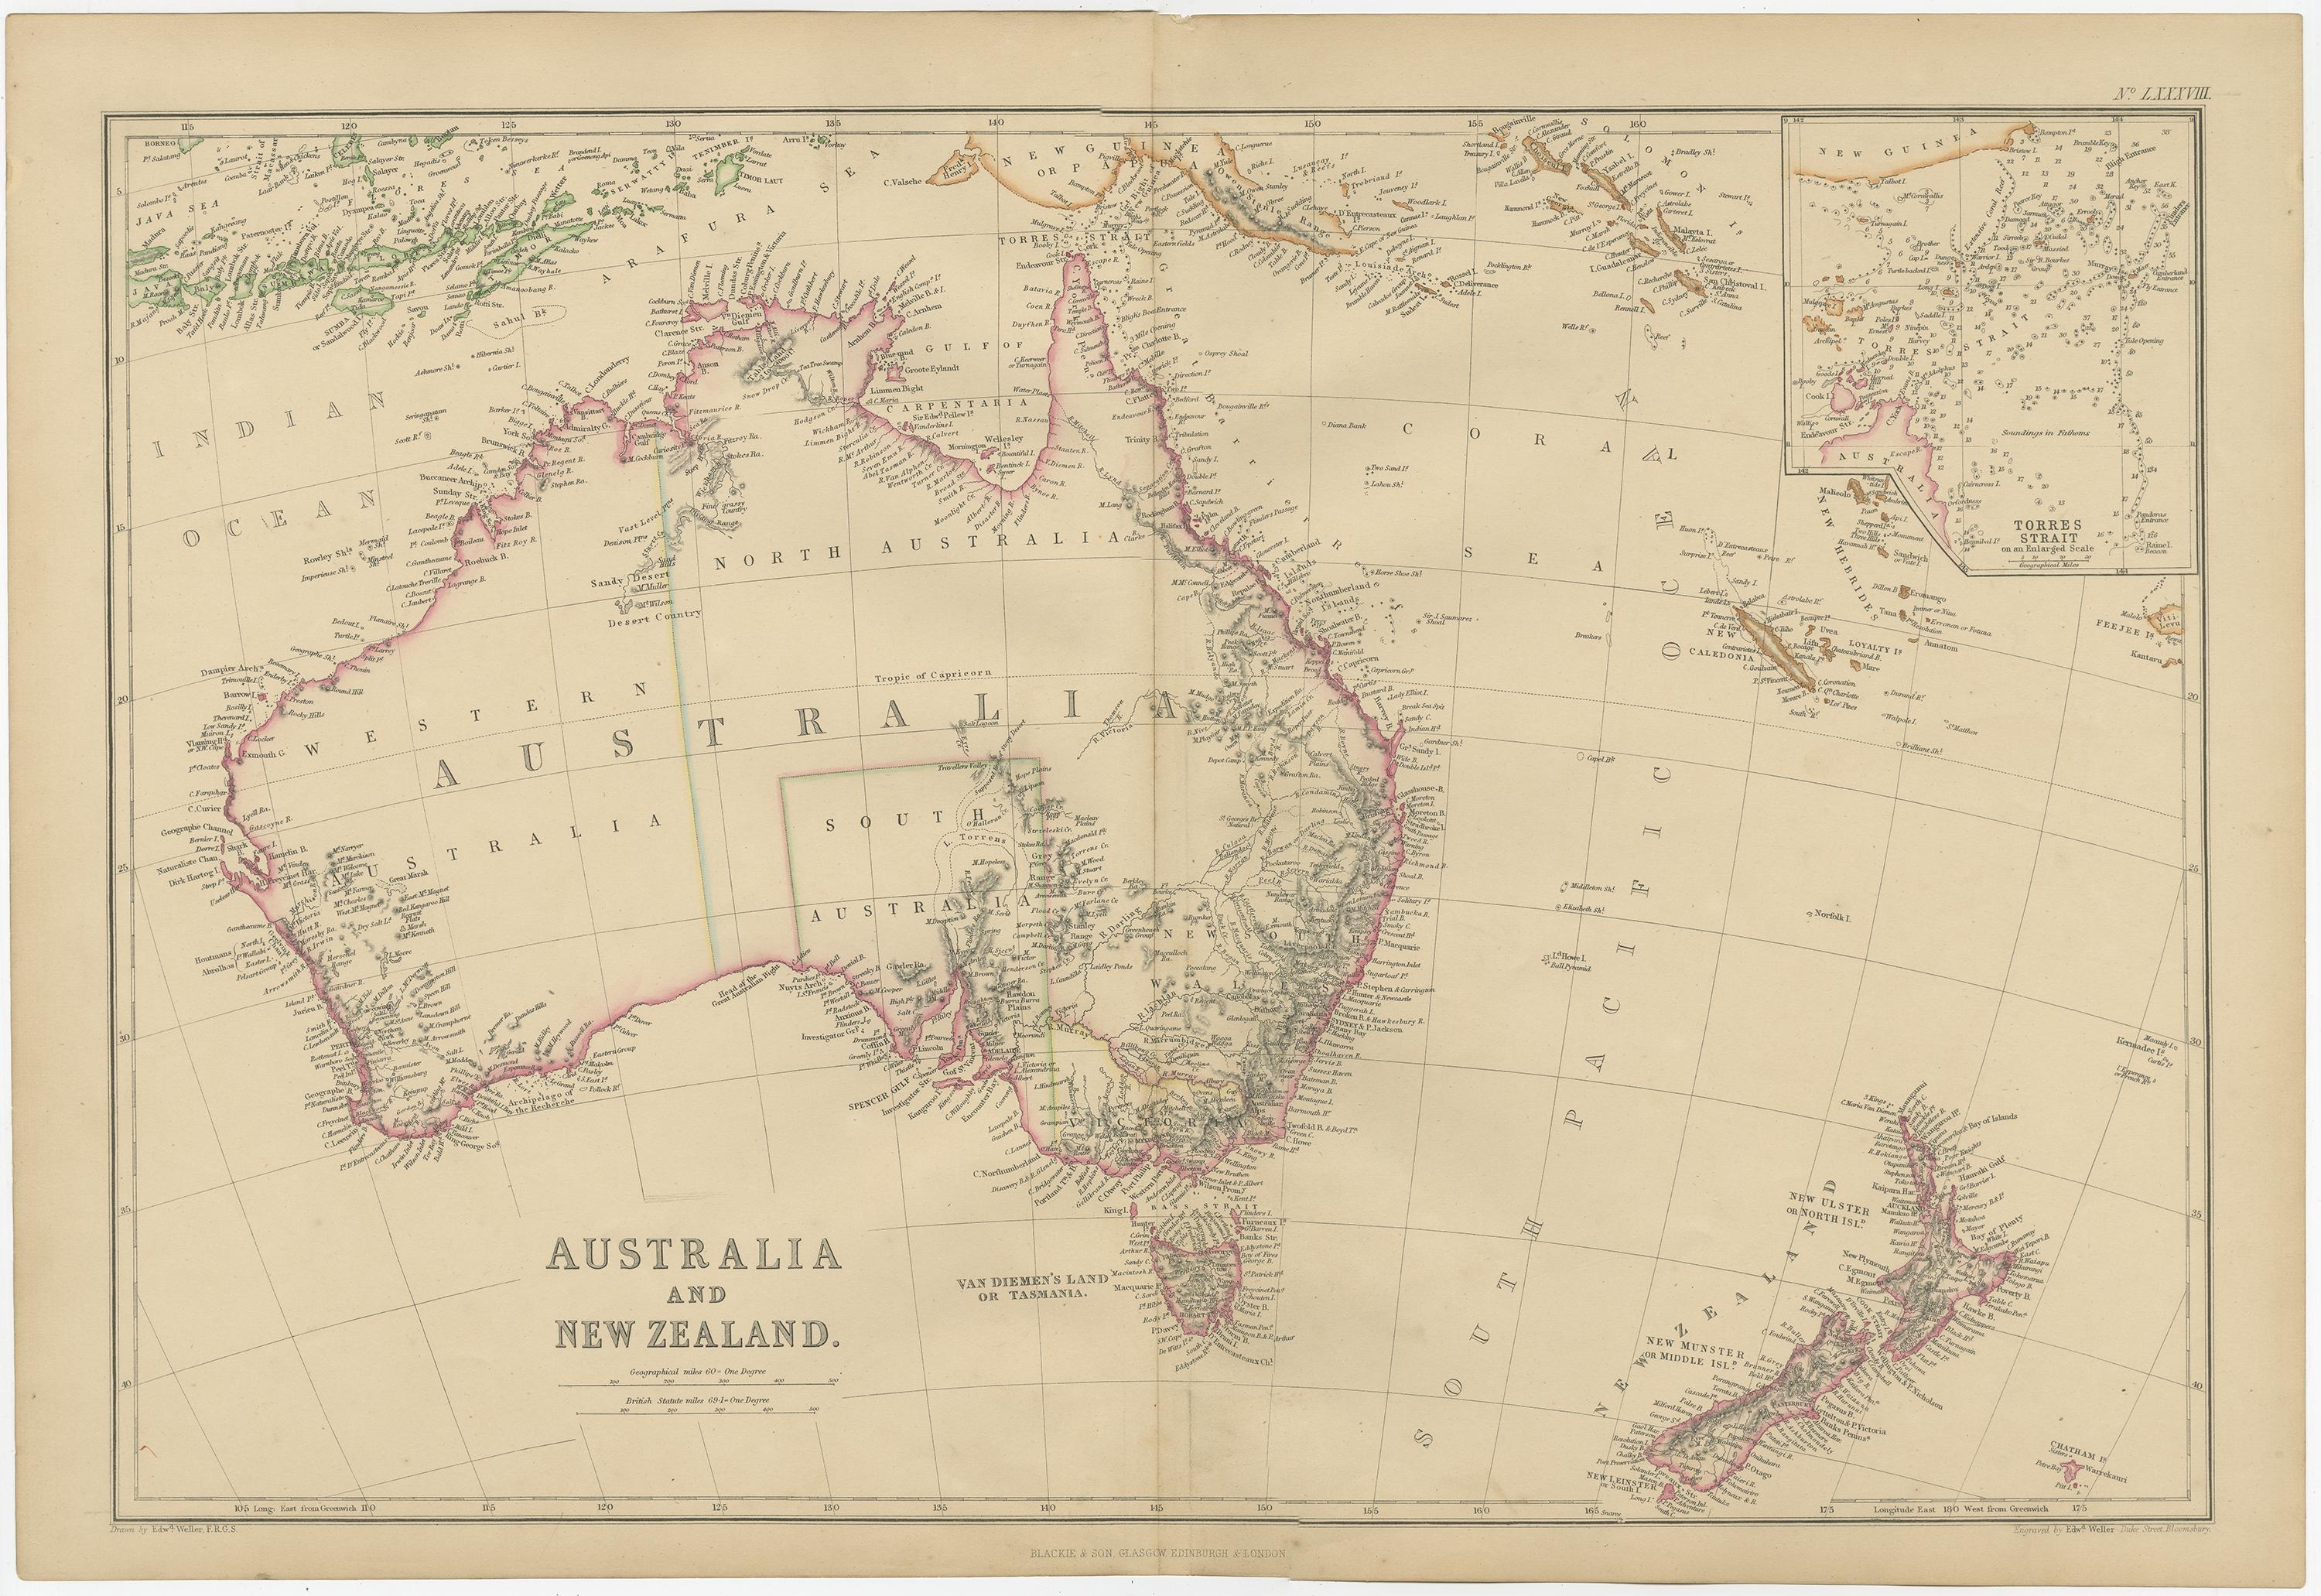 Antique map titled 'Australia and New Zealand'. Original antique map of Australia and New Zealand with inset map of the Torres Strait. This map originates from ‘The Imperial Atlas of Modern Geography’. Published by W. G. Blackie, 1859.